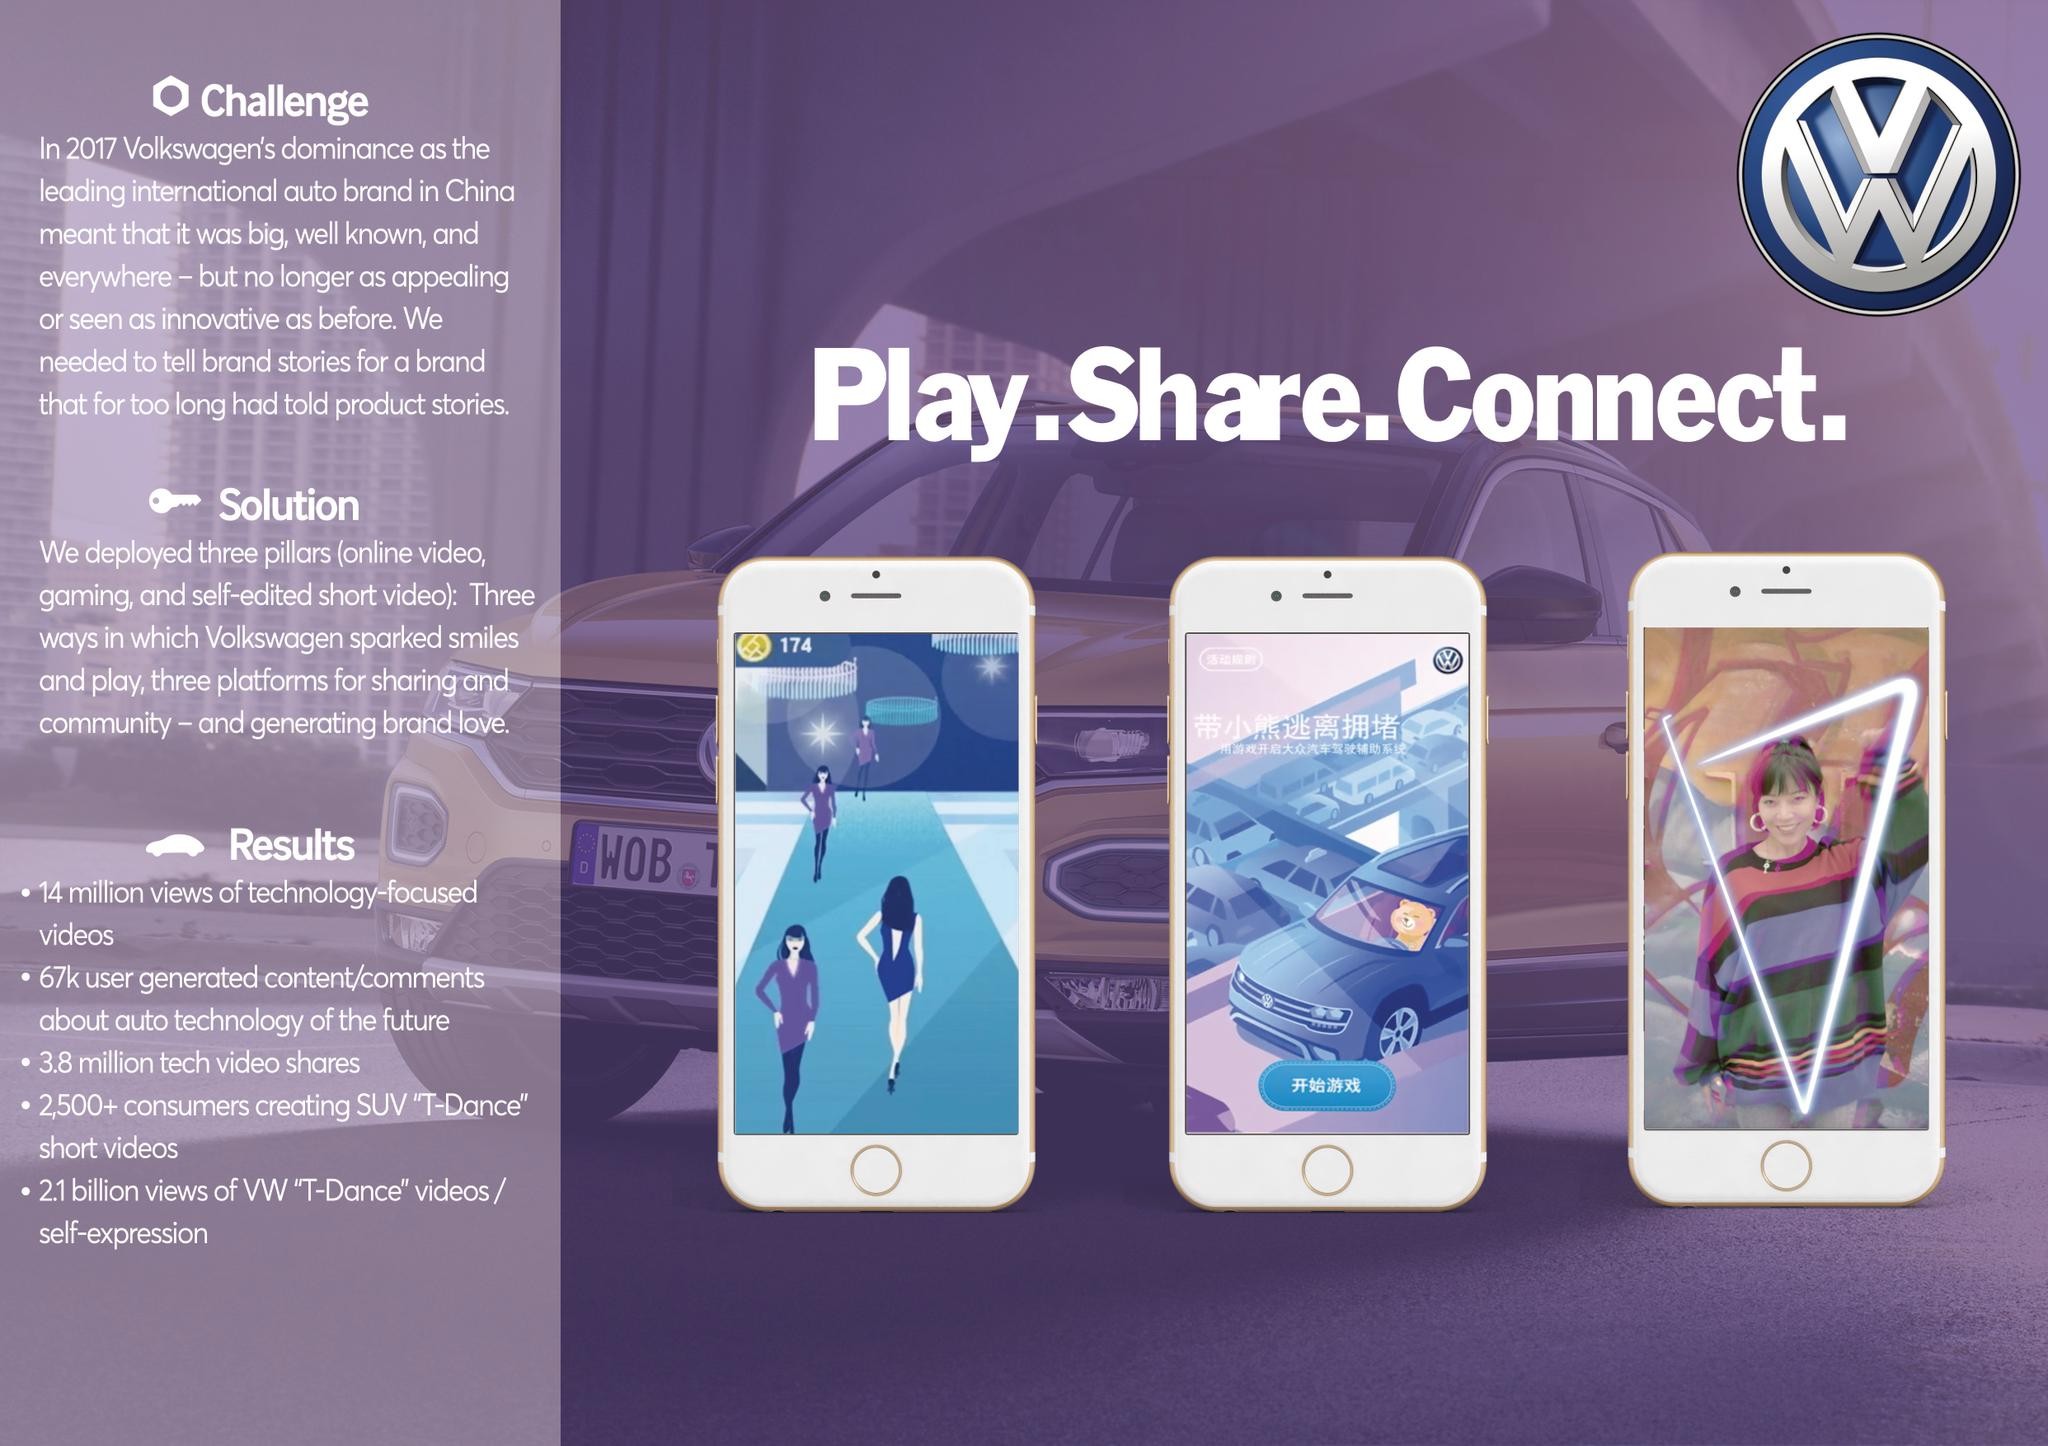 Play. Share. Connect.